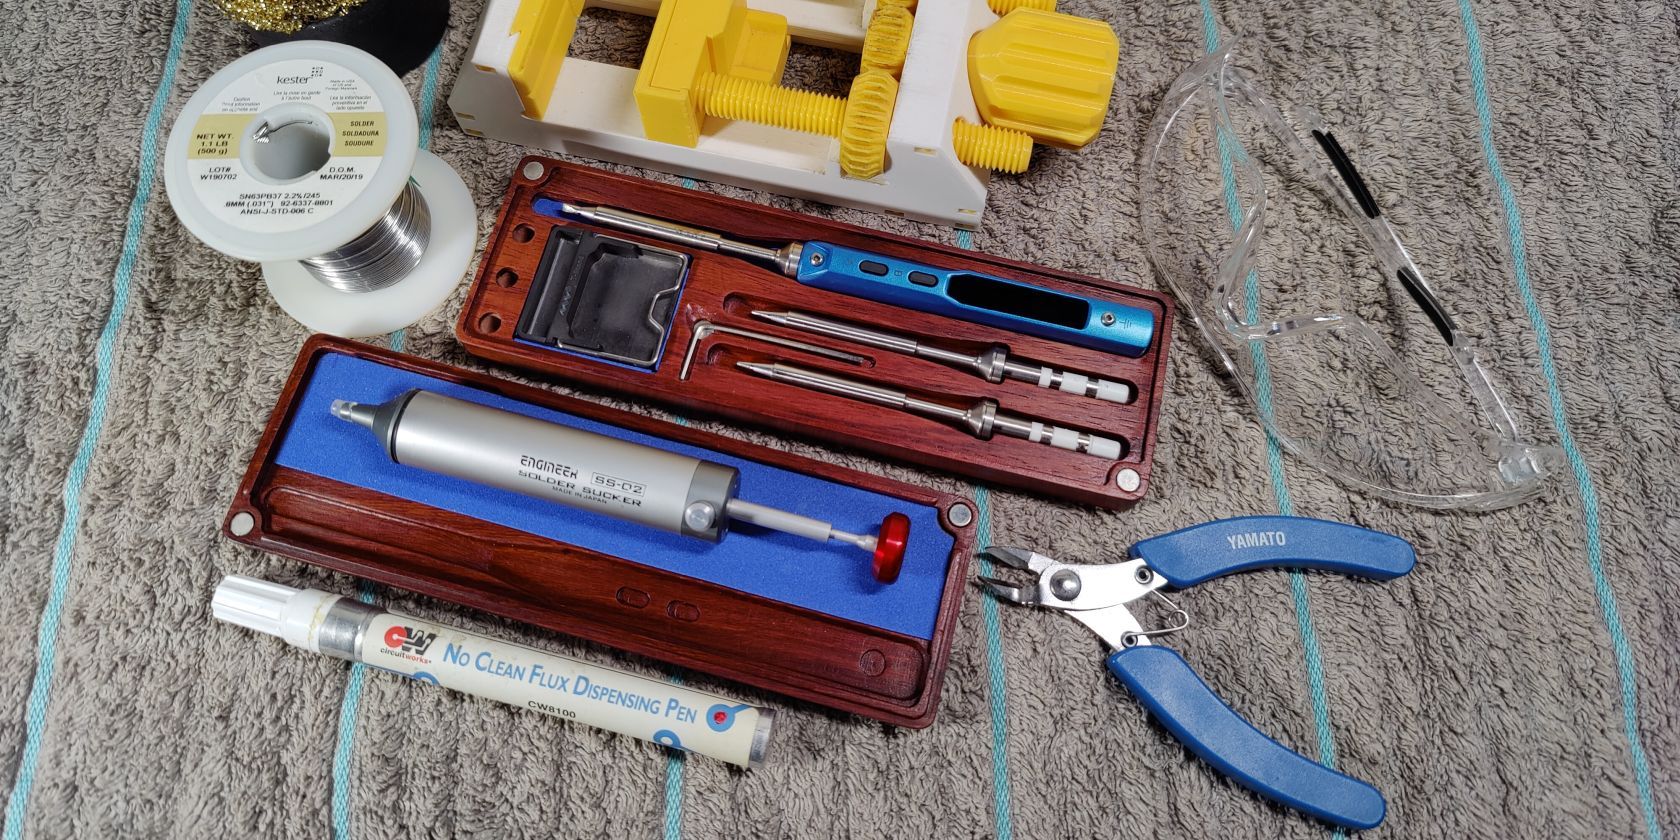 Photo of a desoldering pump and other tools